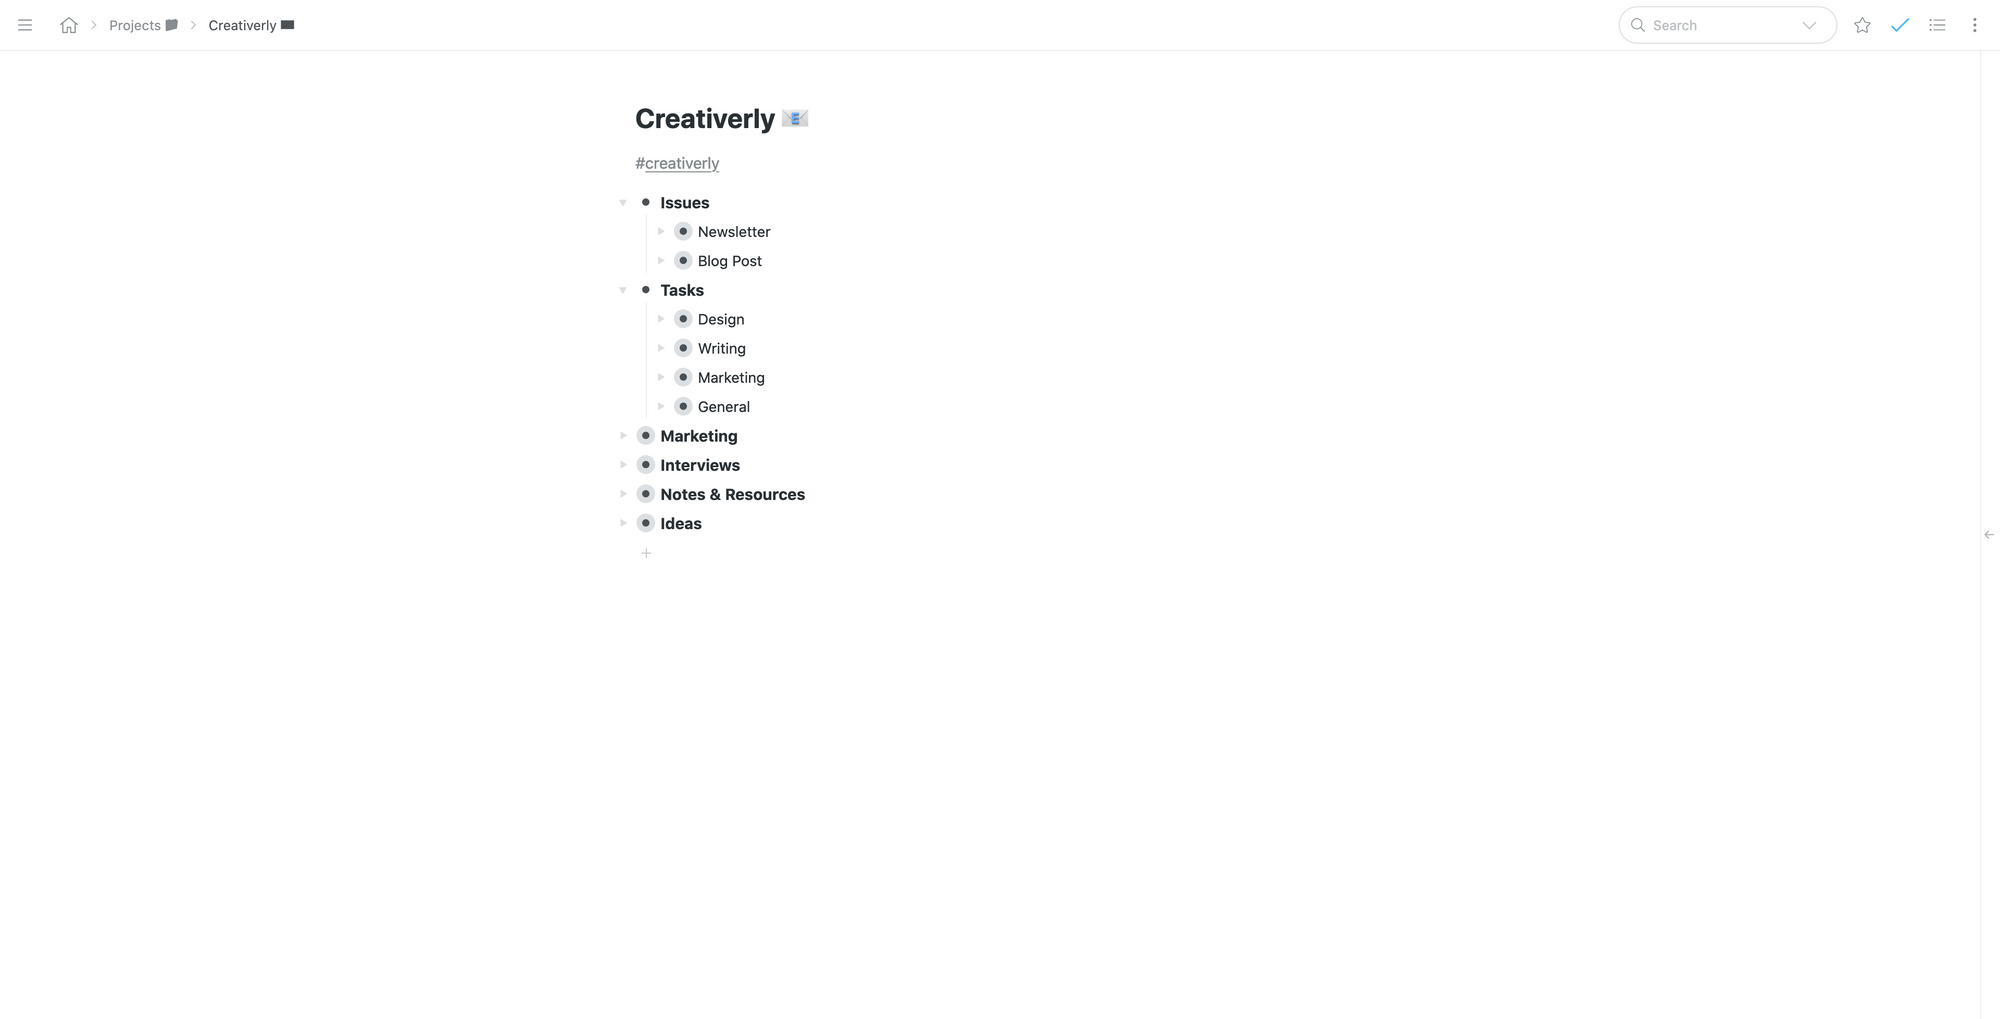 Screenshot of User Interface of Workflowy Web App displaying a Project Page of Creativerly Newsletter consisting of 12 bullets focusing on different topics